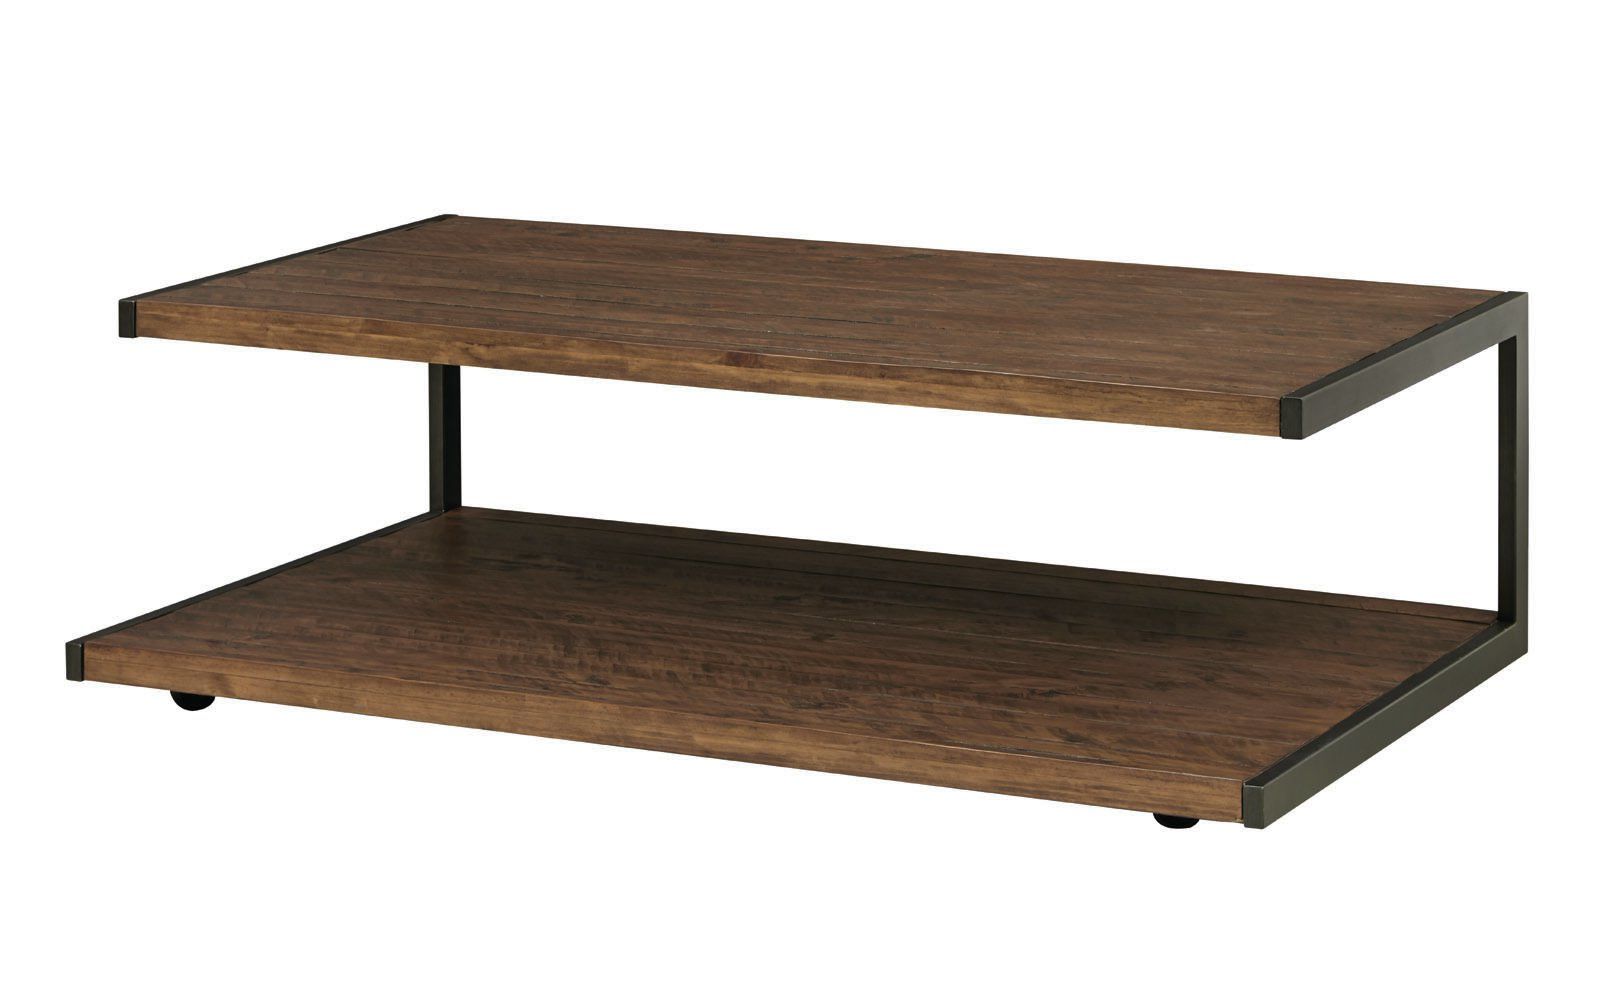 Famous Montgomery Industrial Reclaimed Wood Coffee Tables With Casters Throughout Gracie Oaks Warleigh Coffee Table With Casters Wayfair (Gallery 20 of 20)